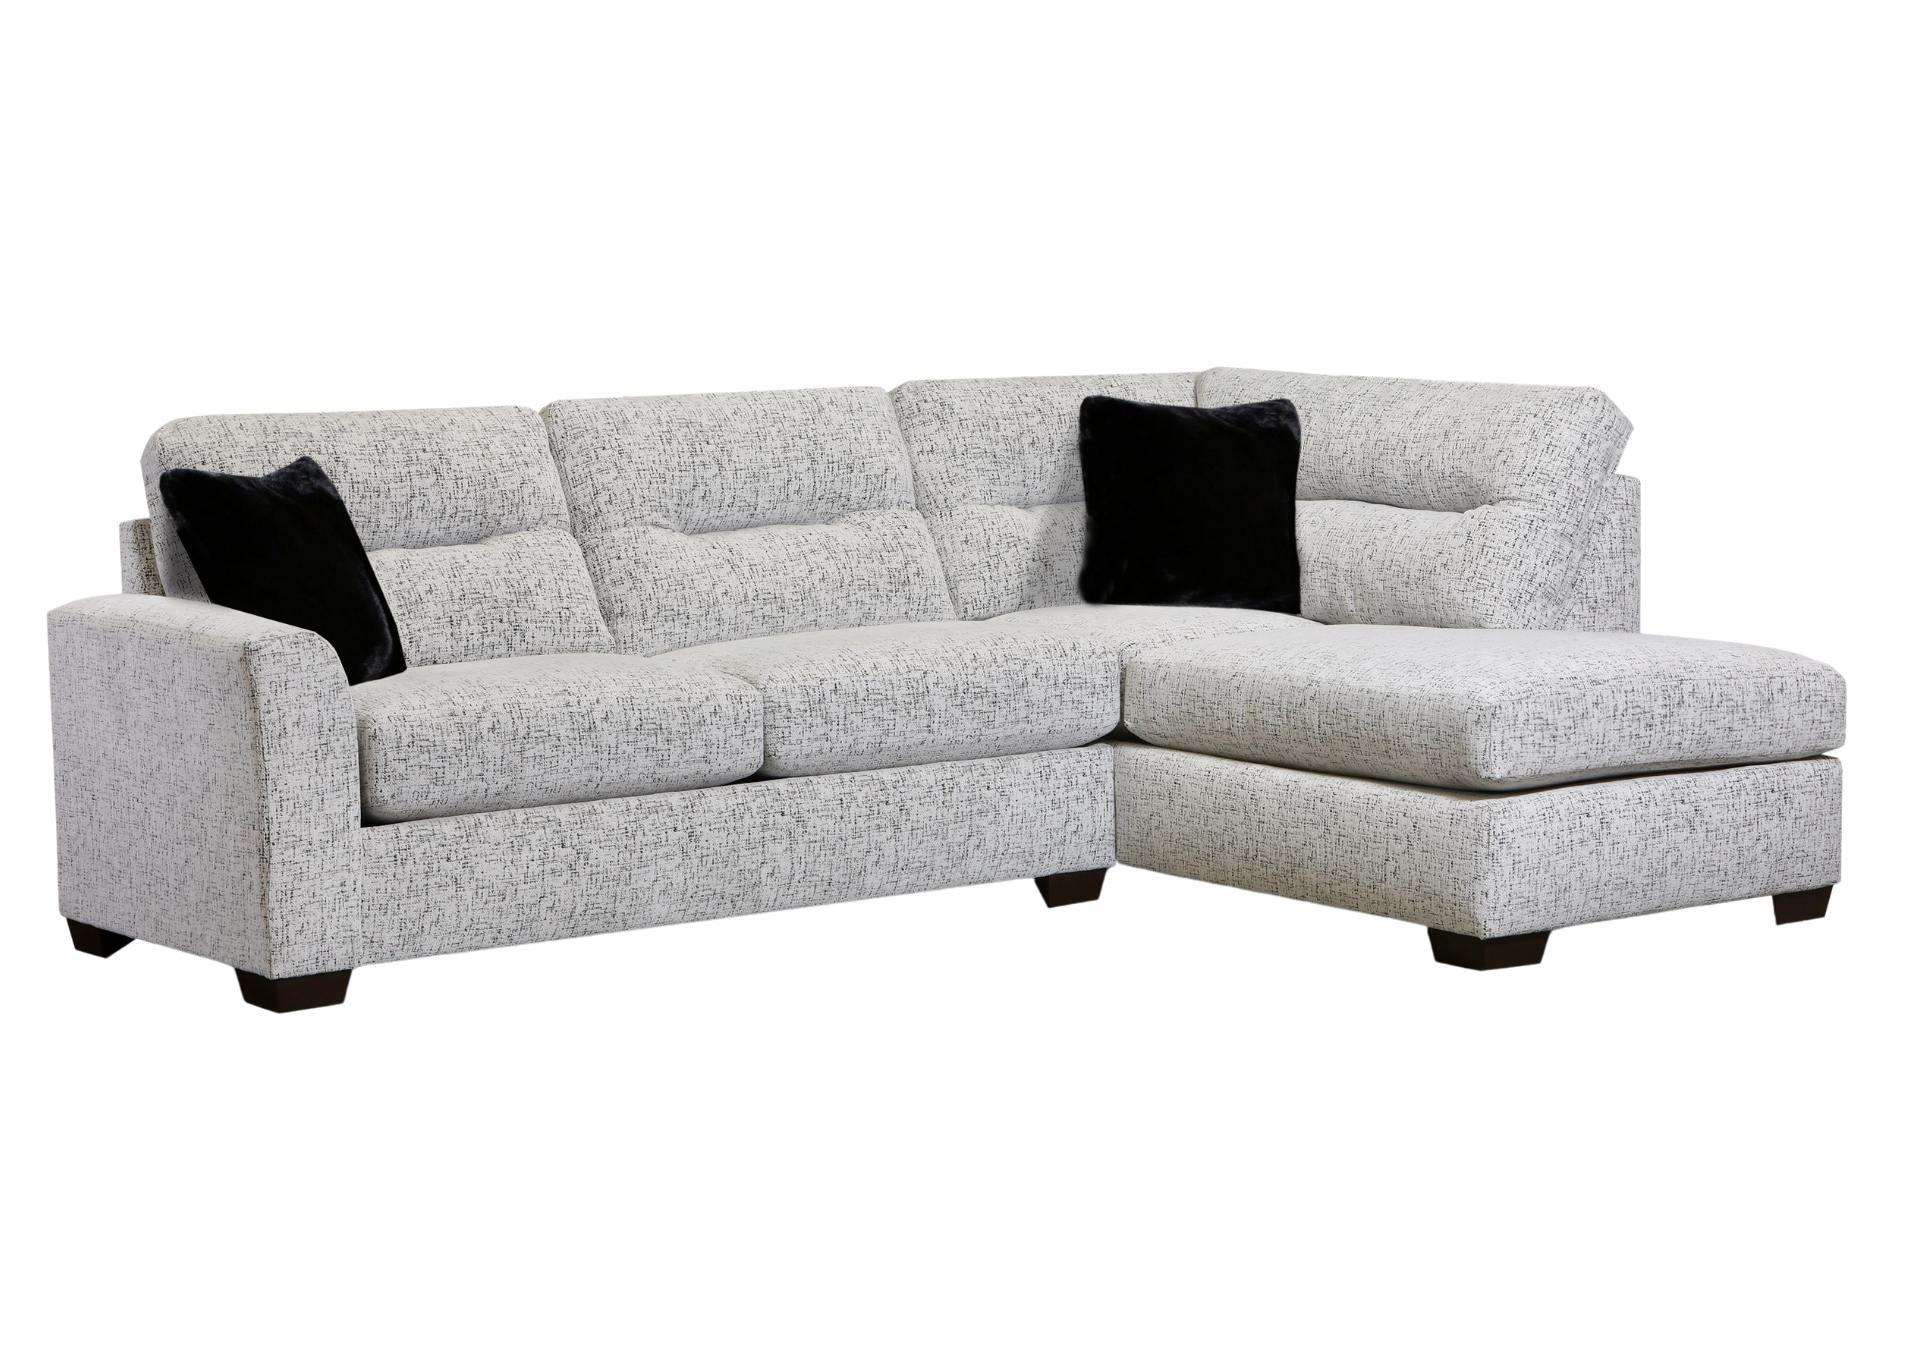 VICTORIE 2 PIECE SECTIONAL